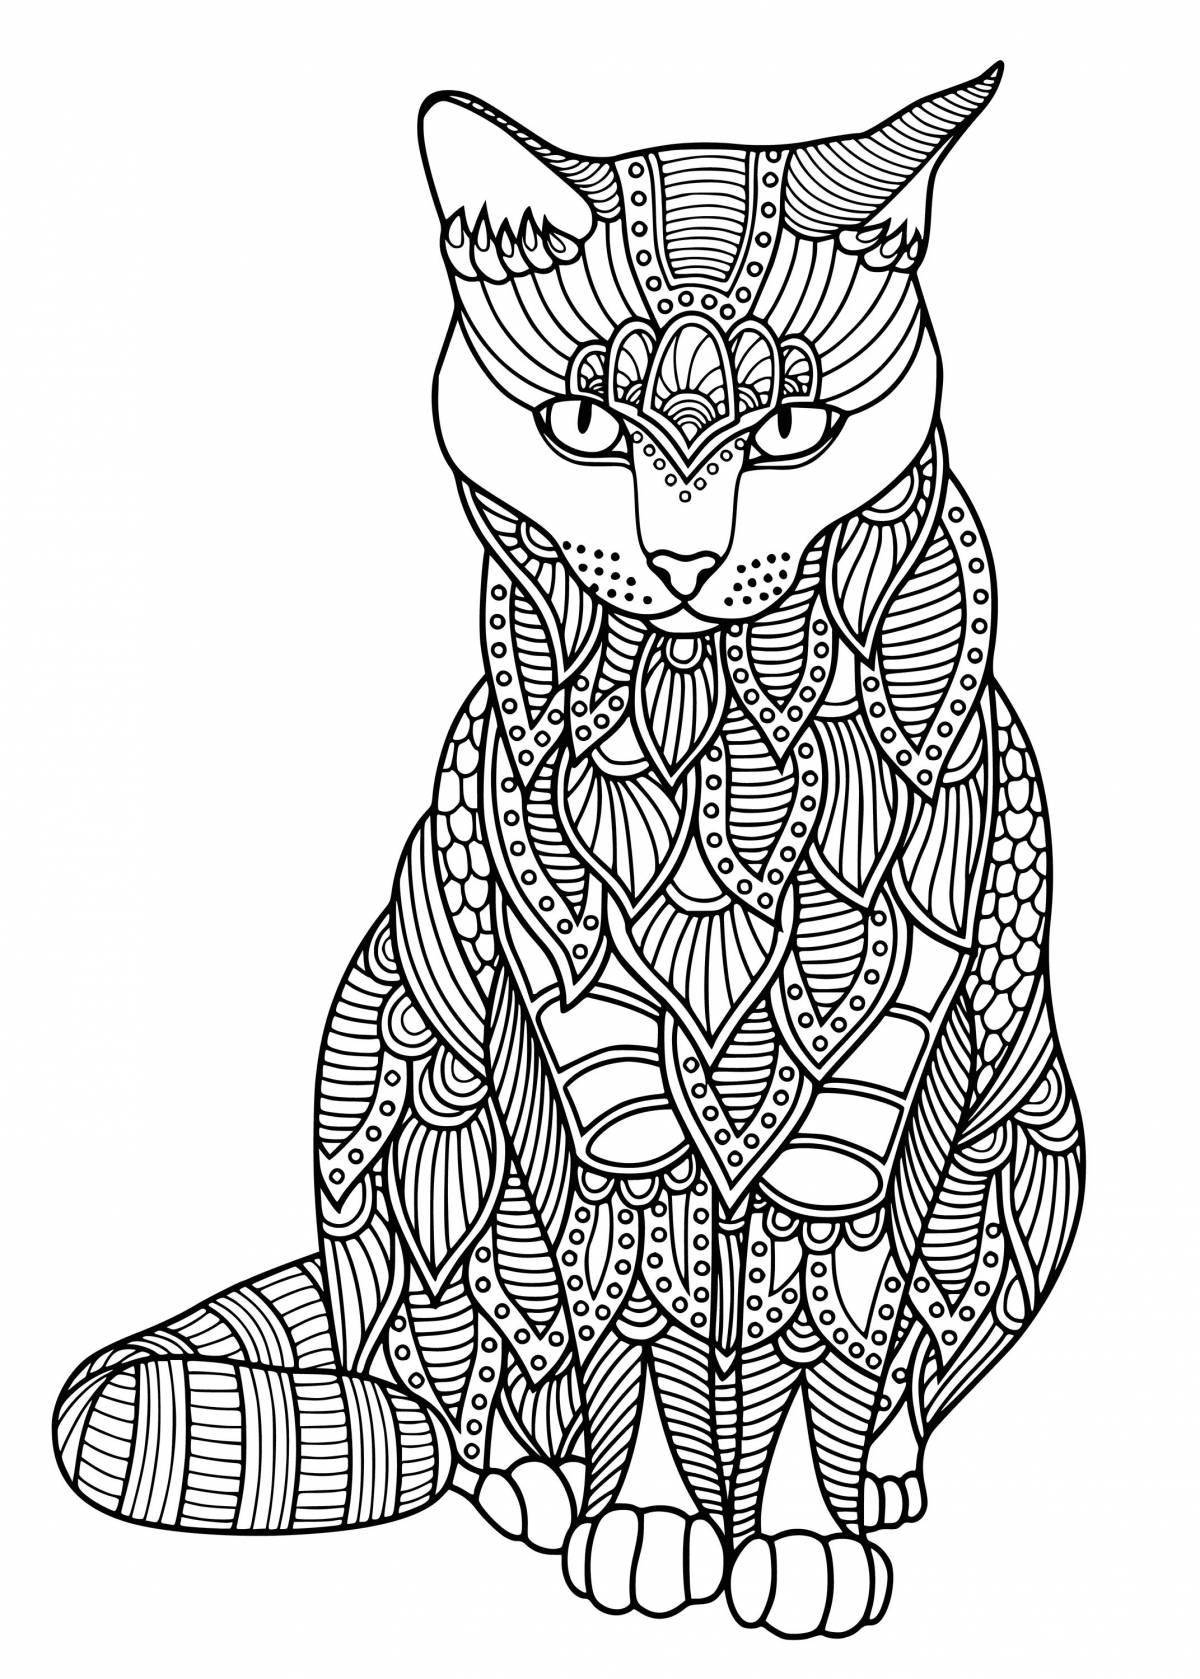 Serene animal coloring pages for adults